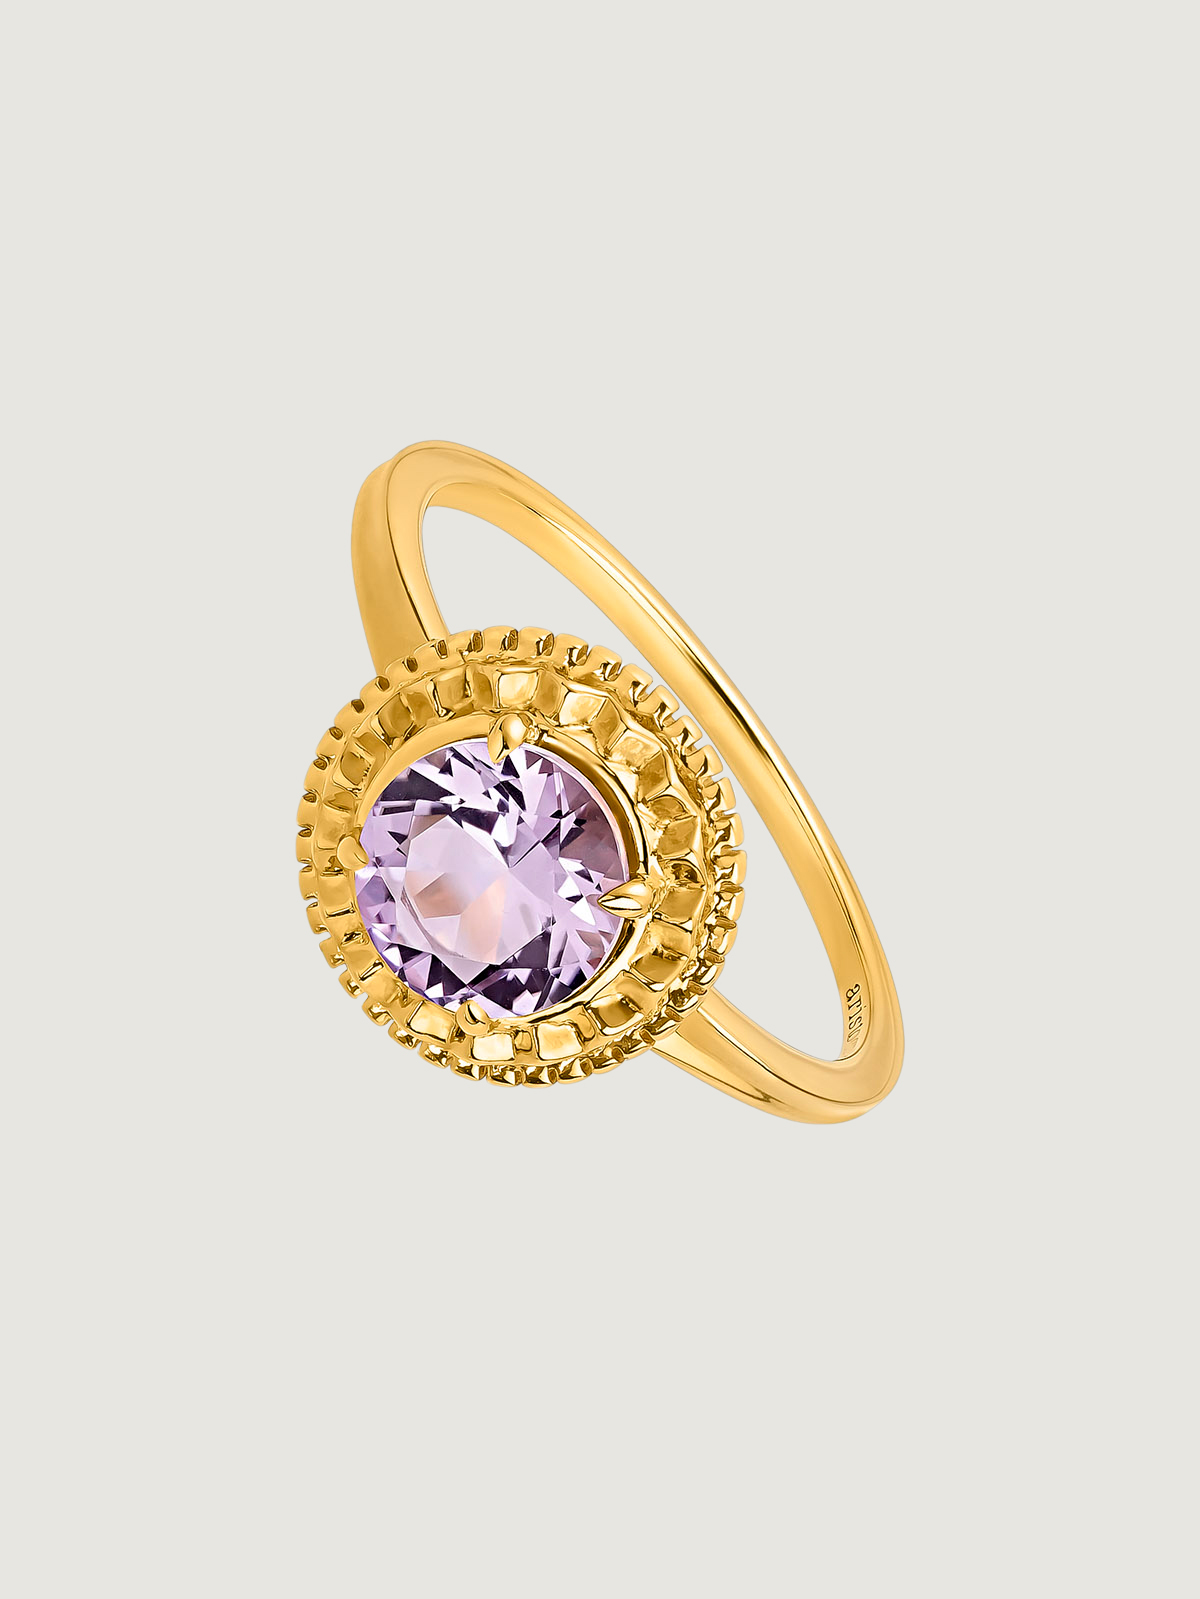 925 Silver ring bathed in 18K yellow gold with pink amethyst